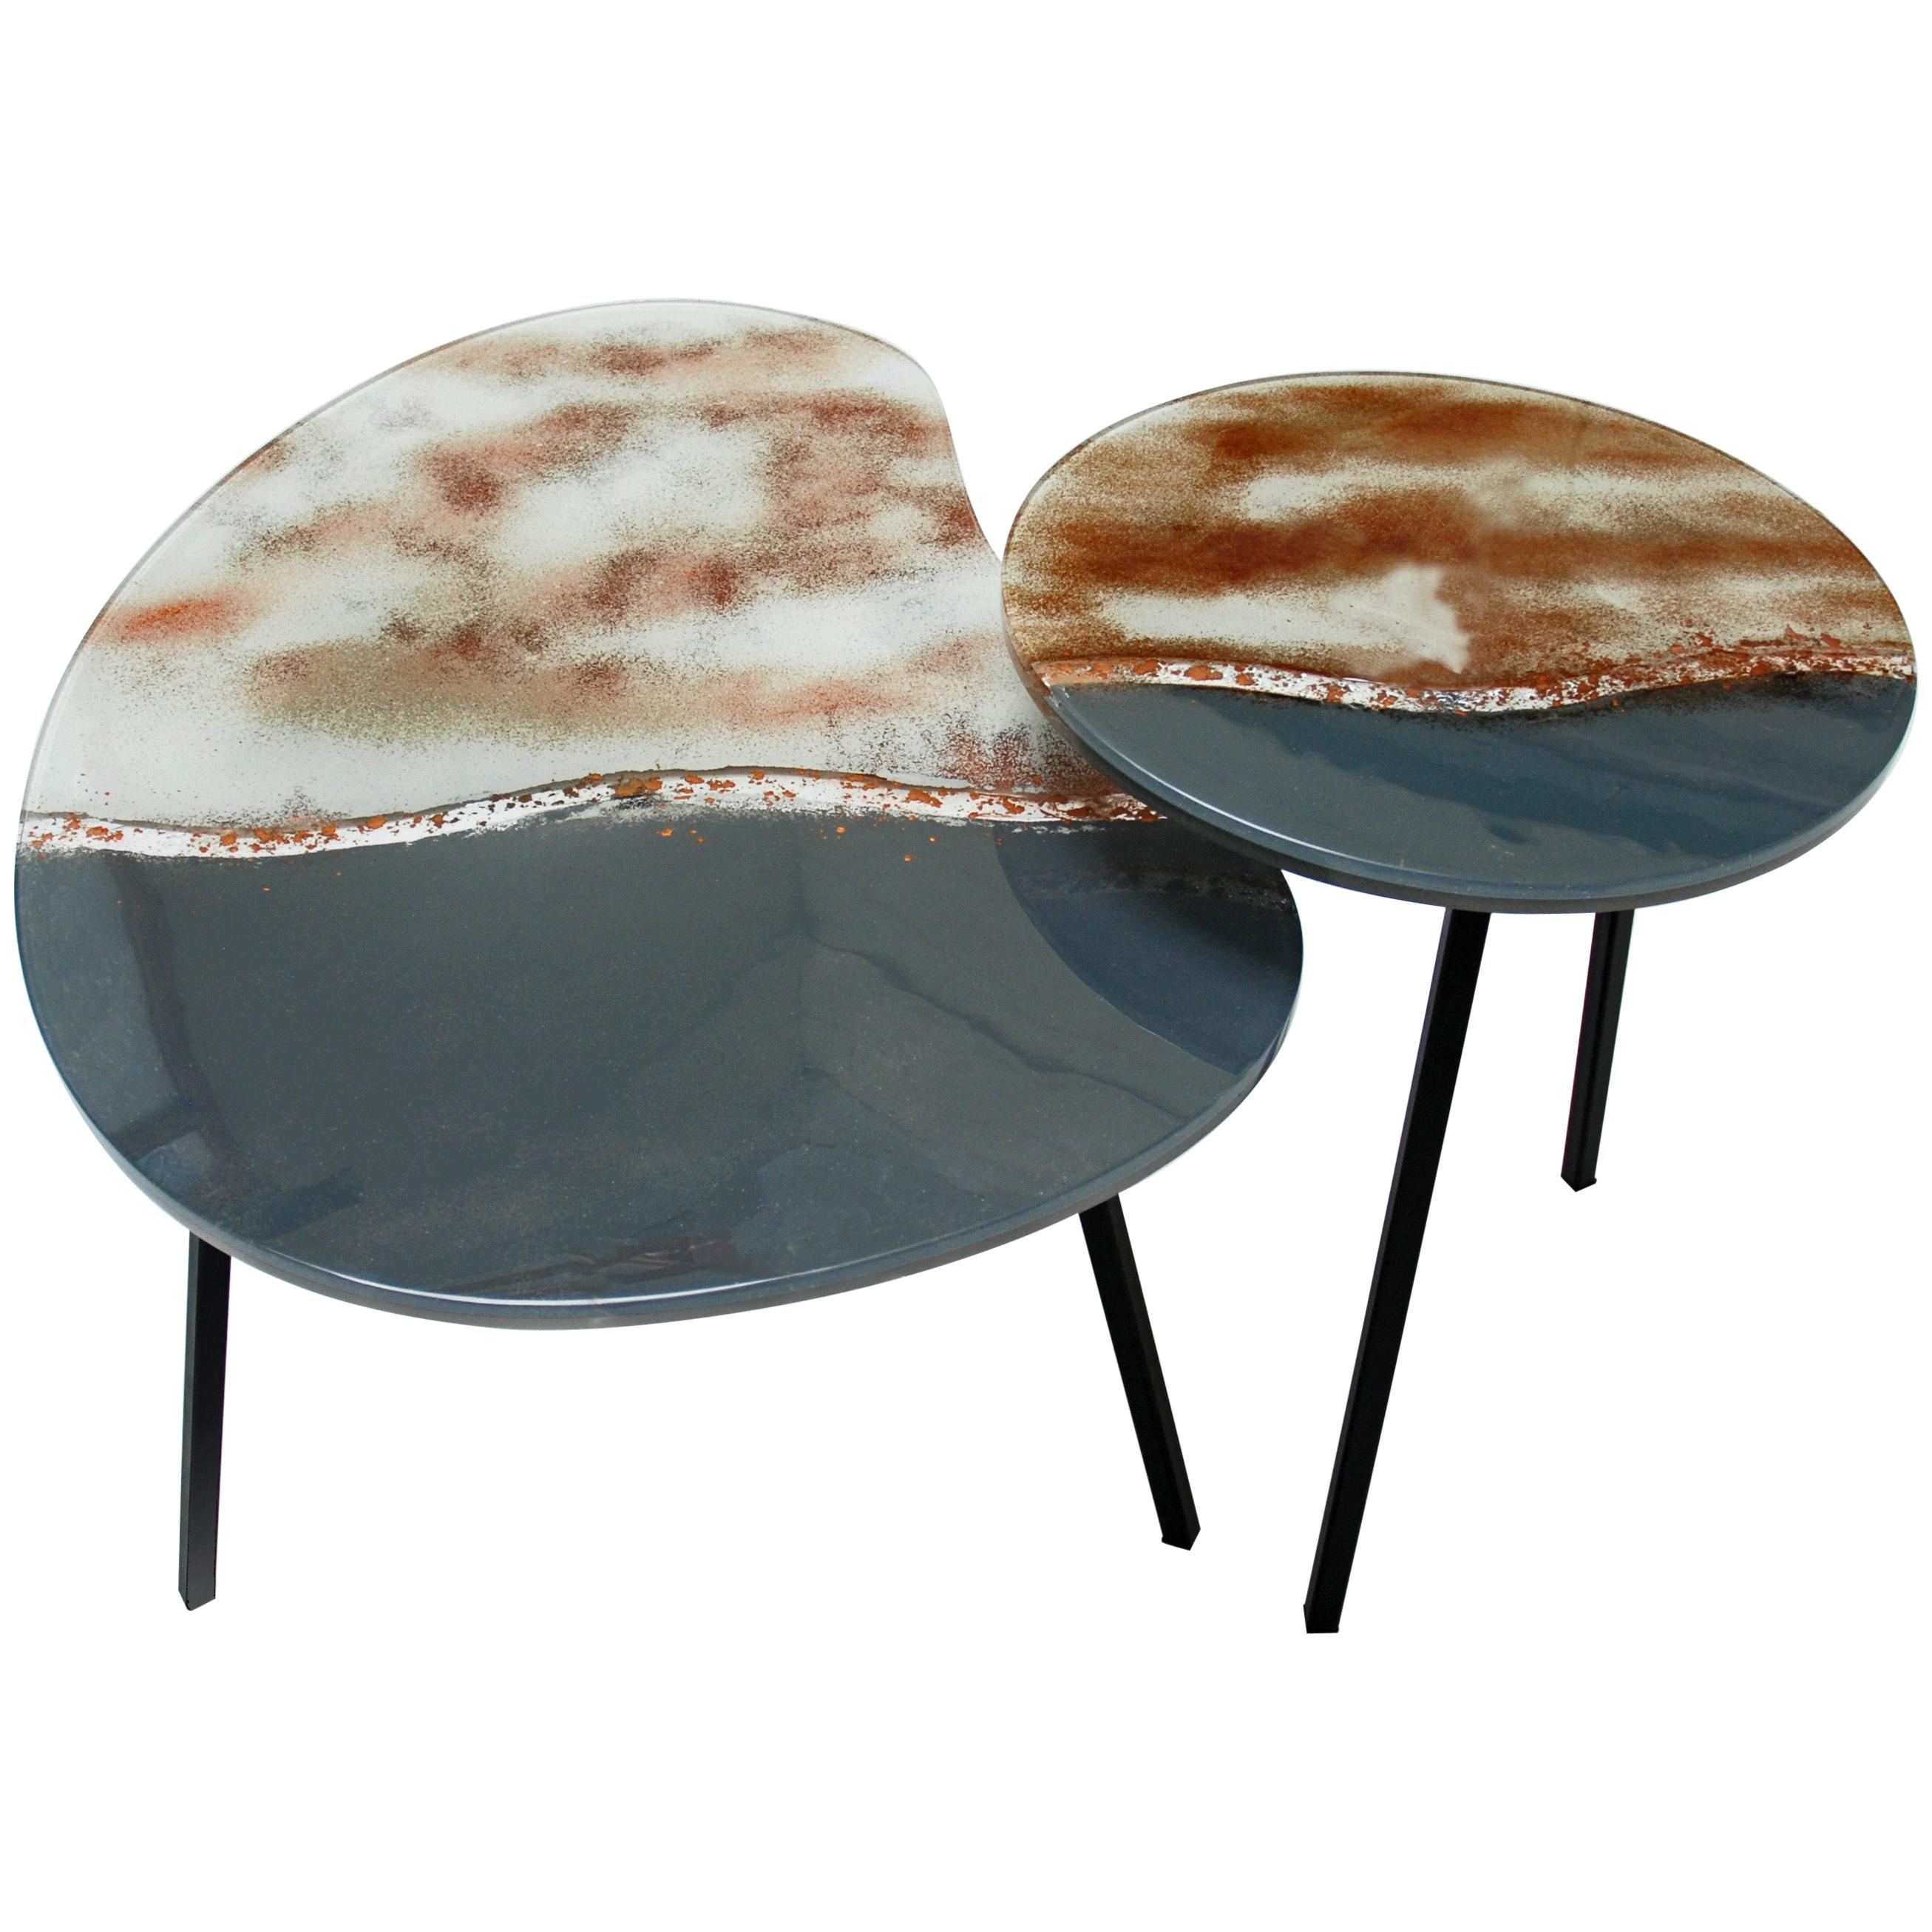 Modern Contemporary Round Coffee Tables Murano Glass in Grey, Brown and White